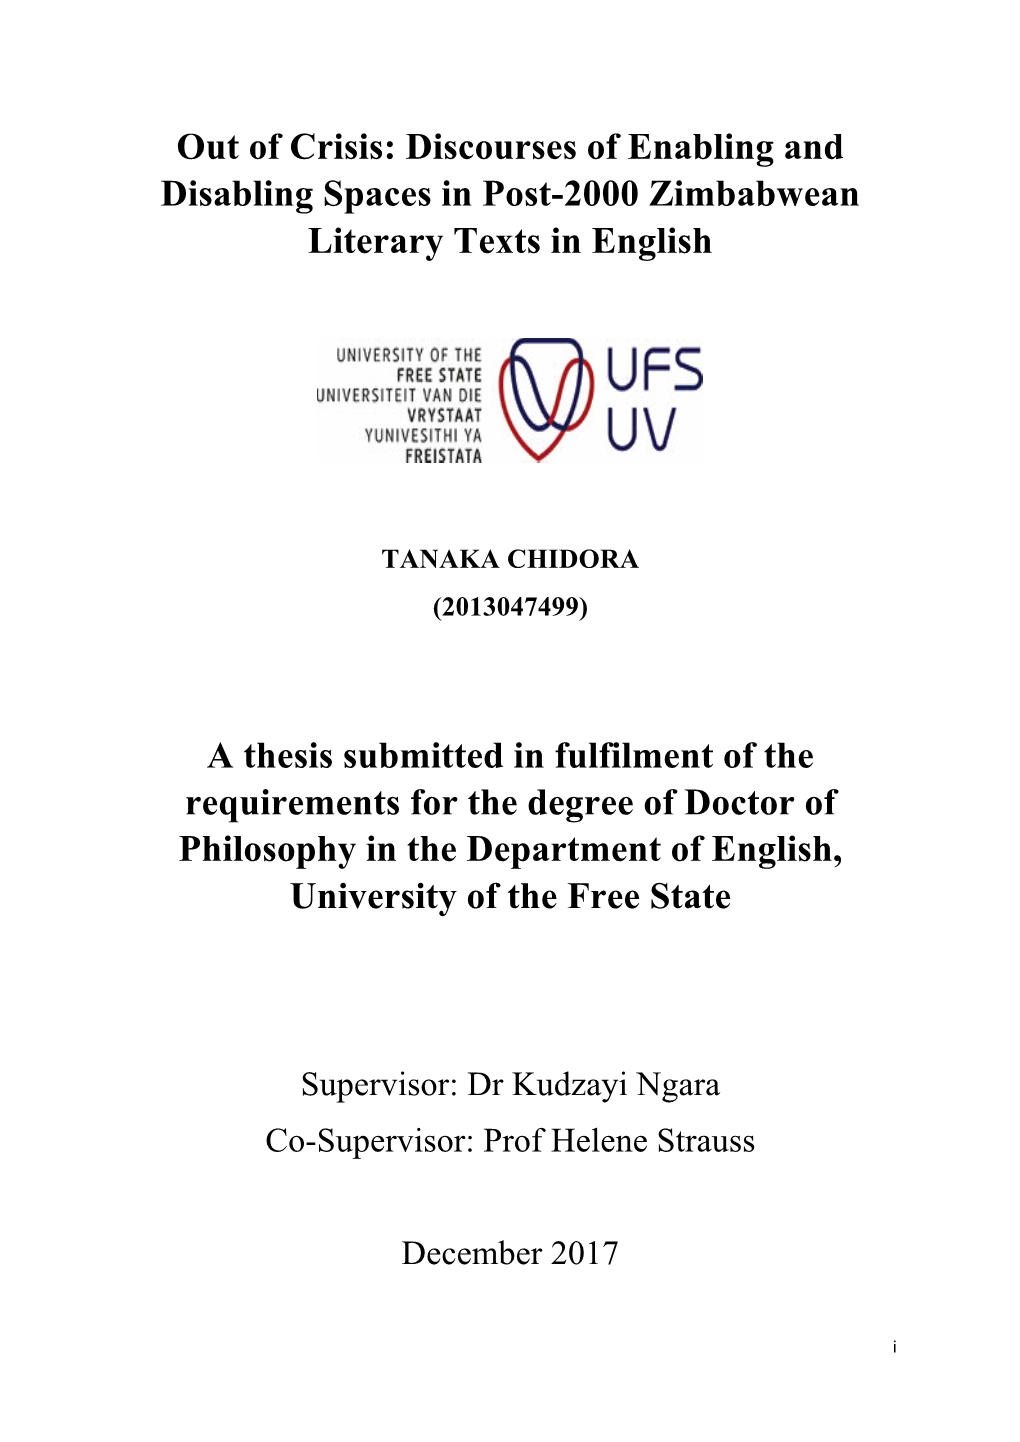 Out of Crisis: Discourses of Enabling and Disabling Spaces in Post-2000 Zimbabwean Literary Texts in English